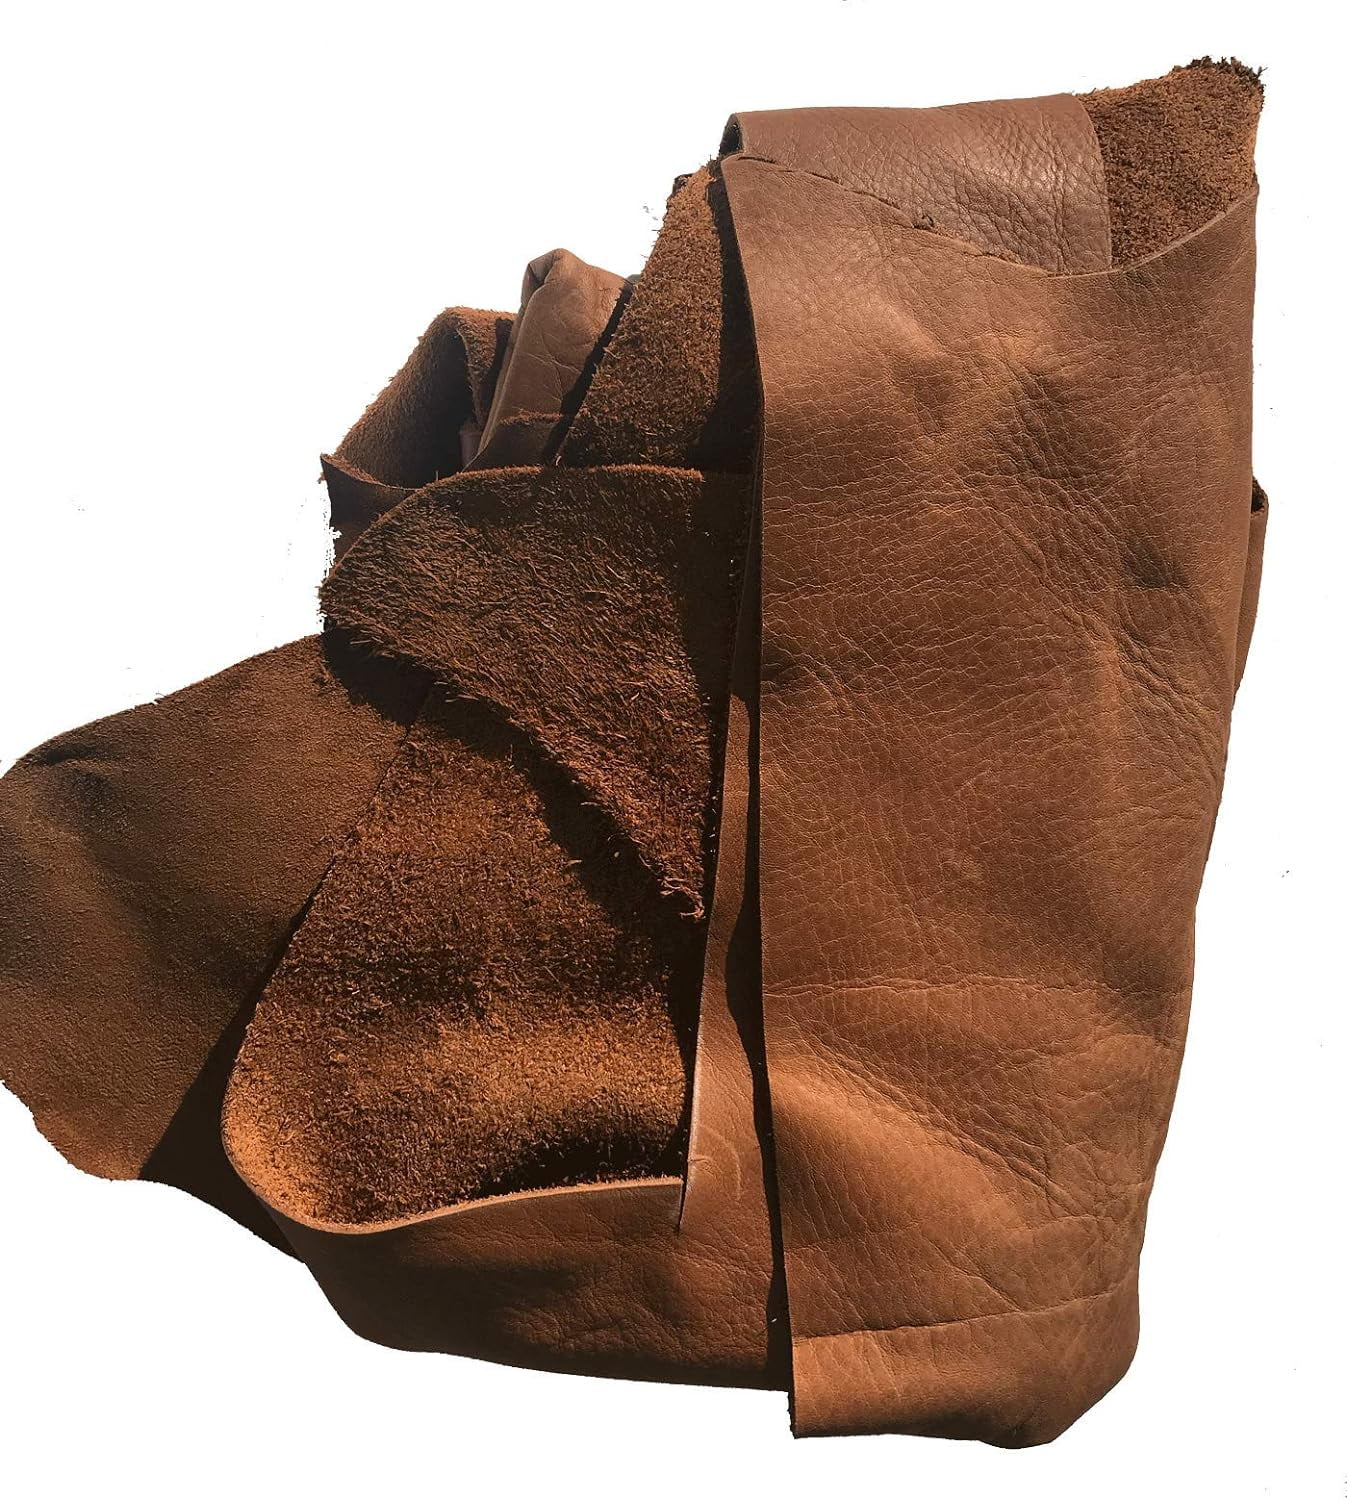 Premium Genuine Leather Scraps - Large Leather Pieces For Crafting - 2 LBS  Brown - Beige - 2-8 Pieces